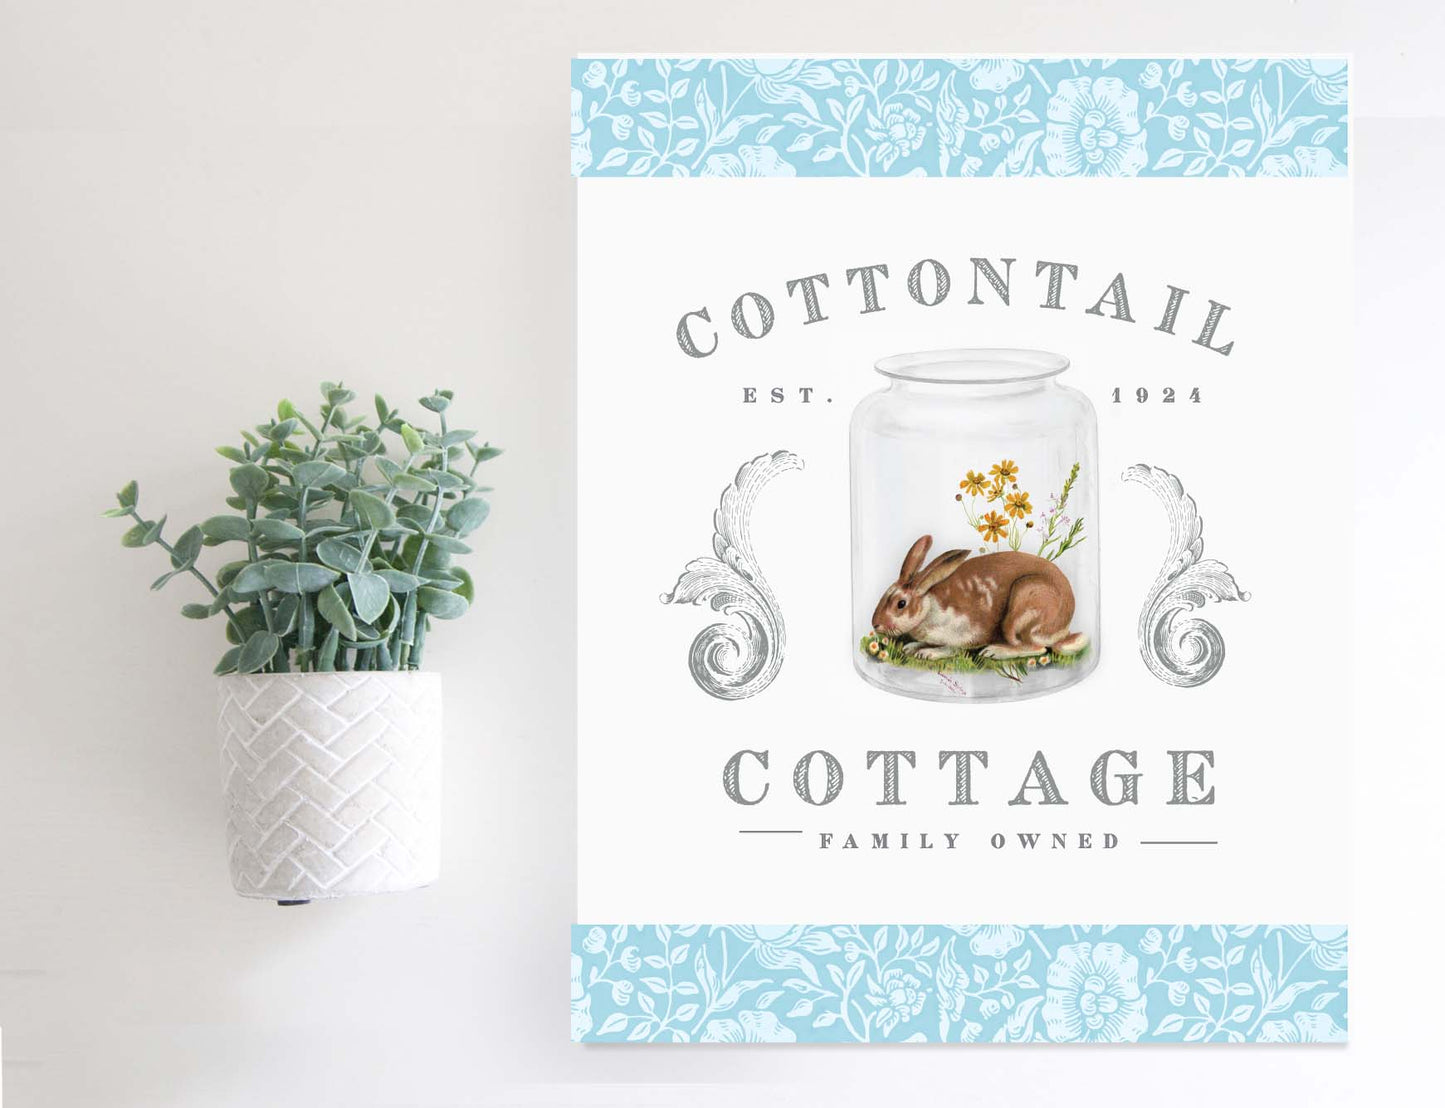 Magnetic Wall Hanging Insert: Cottontail Cottage (Easter/Spring) | INSERT ONLY